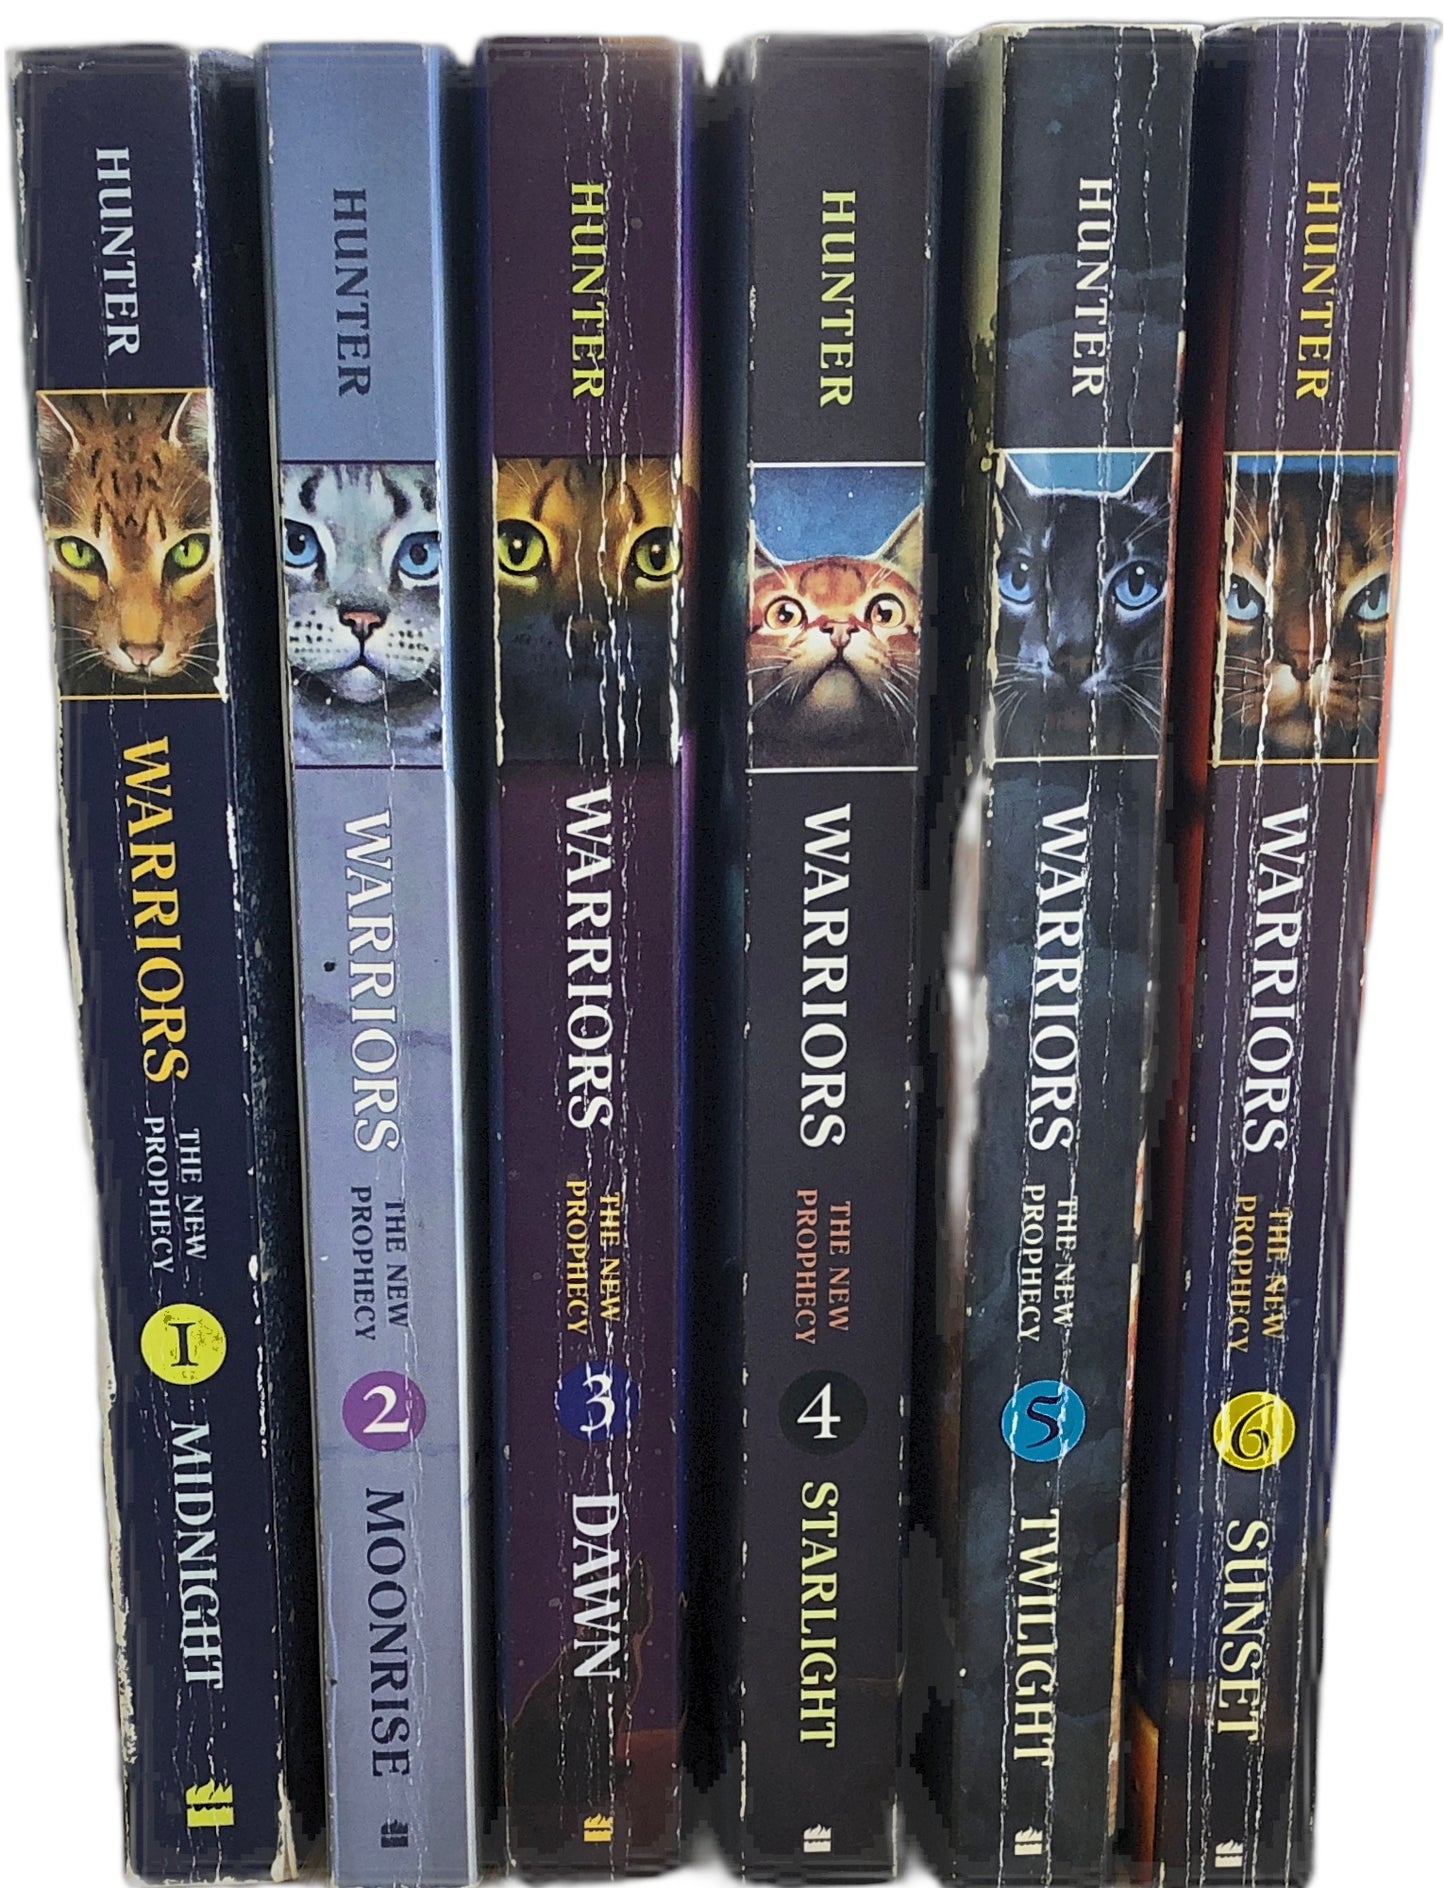 Moonrise (Warriors: The New Prophecy, #2) by Erin Hunter